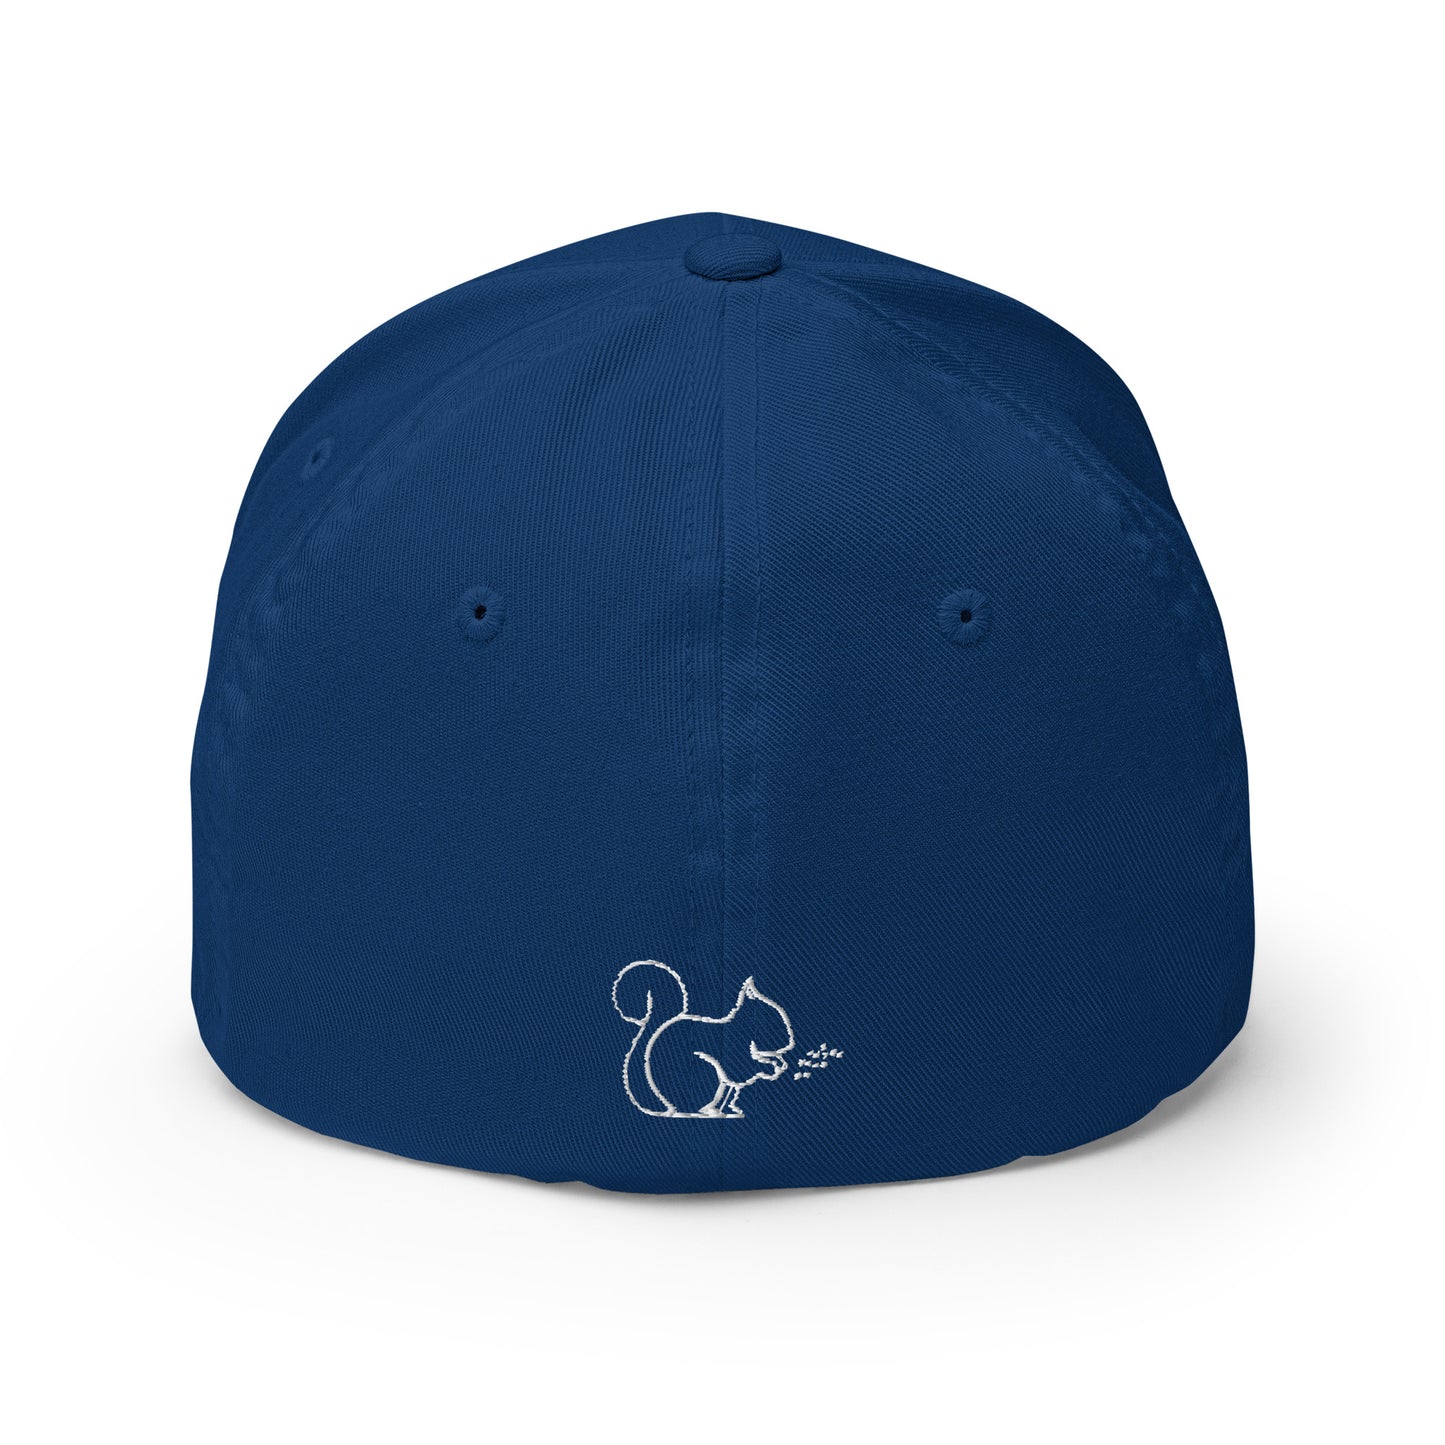 Caddy Couture Structured Twill Cap - Blue